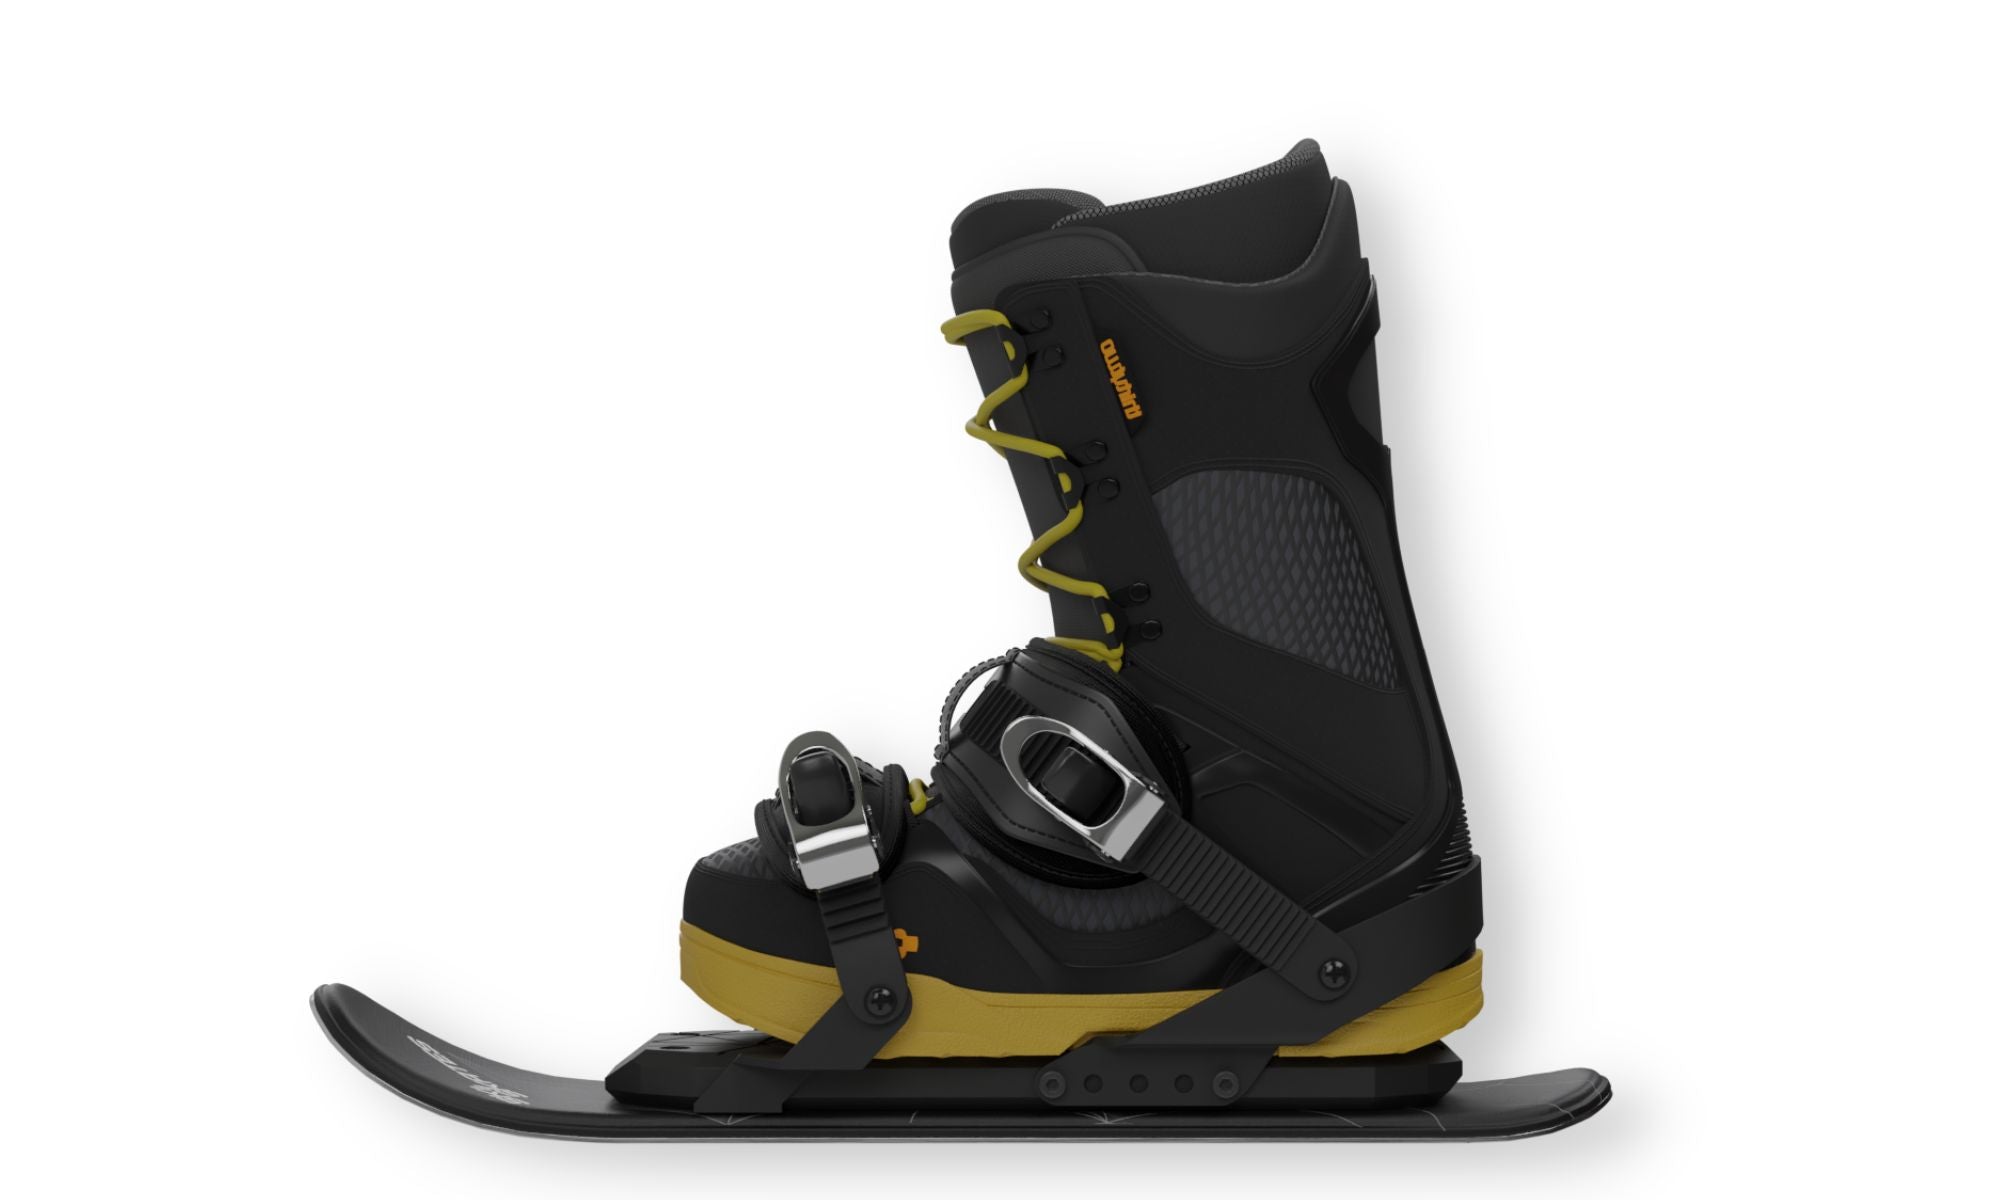 Skiskates. Skates for ski slopes  A combination of skis and skates. They are basically ice skates for ski slopes.  Best for downhill skiing on ski slopes and in snow parks. Snowfeet & Skiskates Reviews. Use Skiskates with snoaboard boots or ski boots.